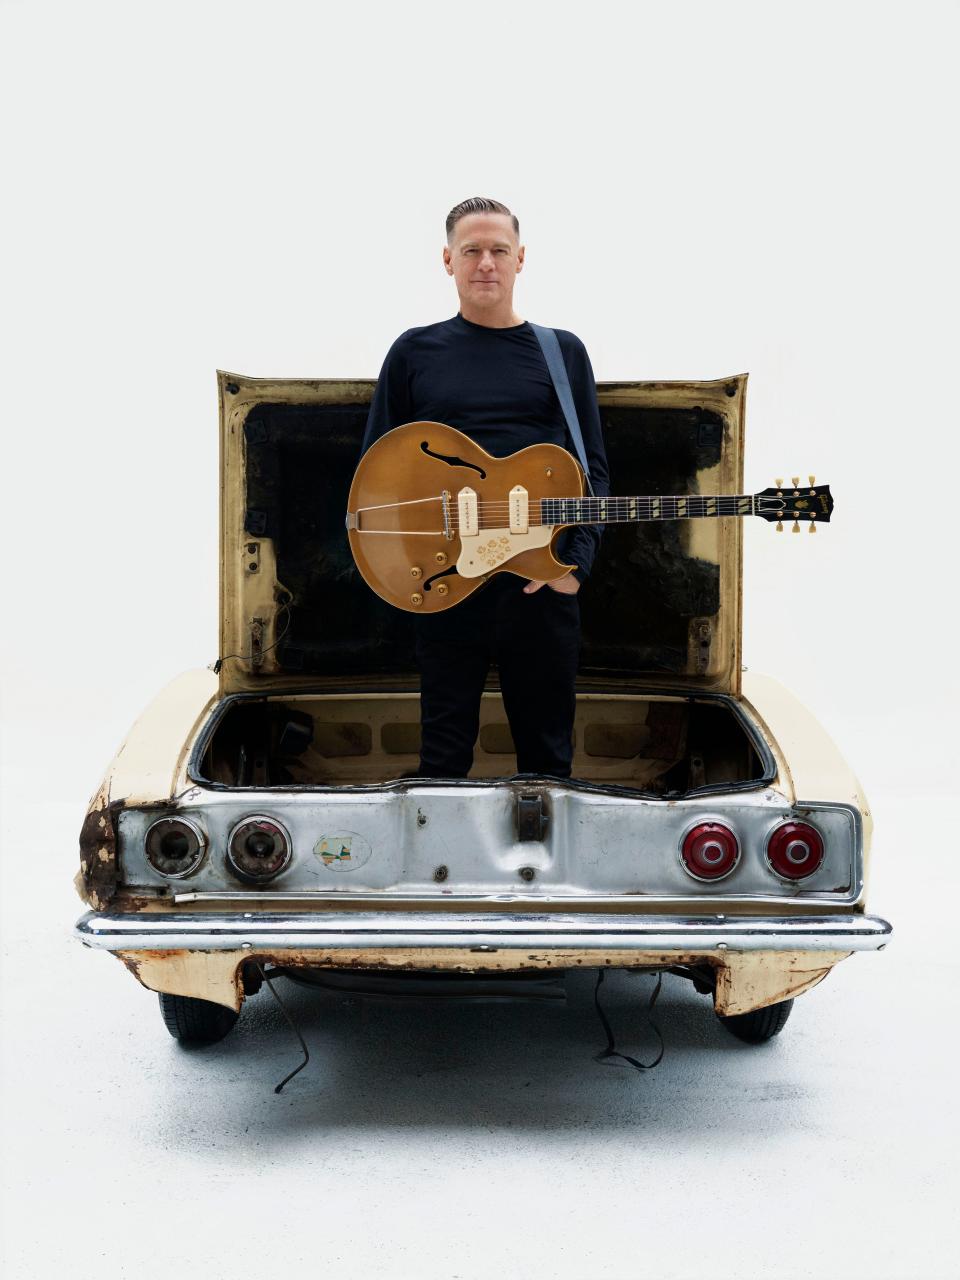 Bryan Adams says he loves the road because of his longstanding relationships with his band and crew.